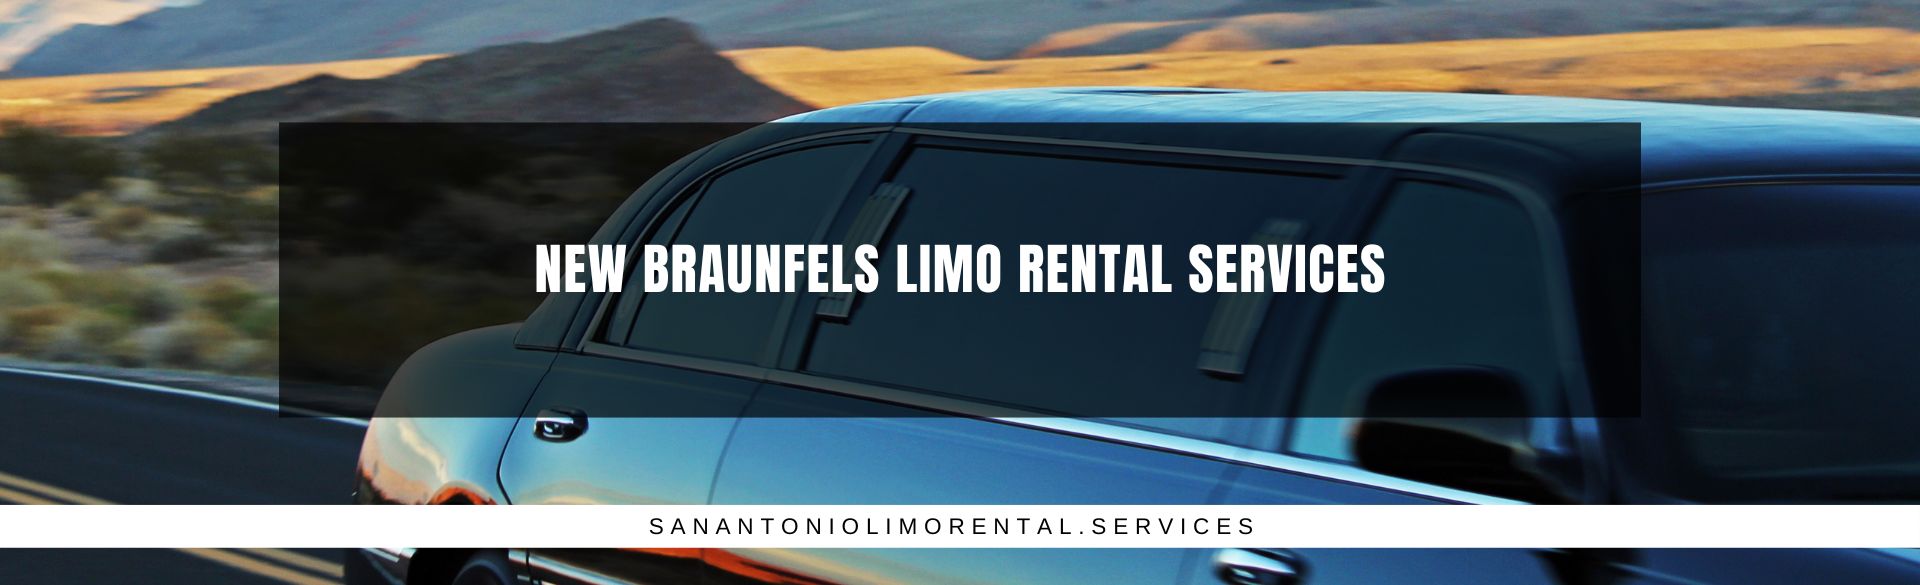 New Braunfels Limo Rental Services